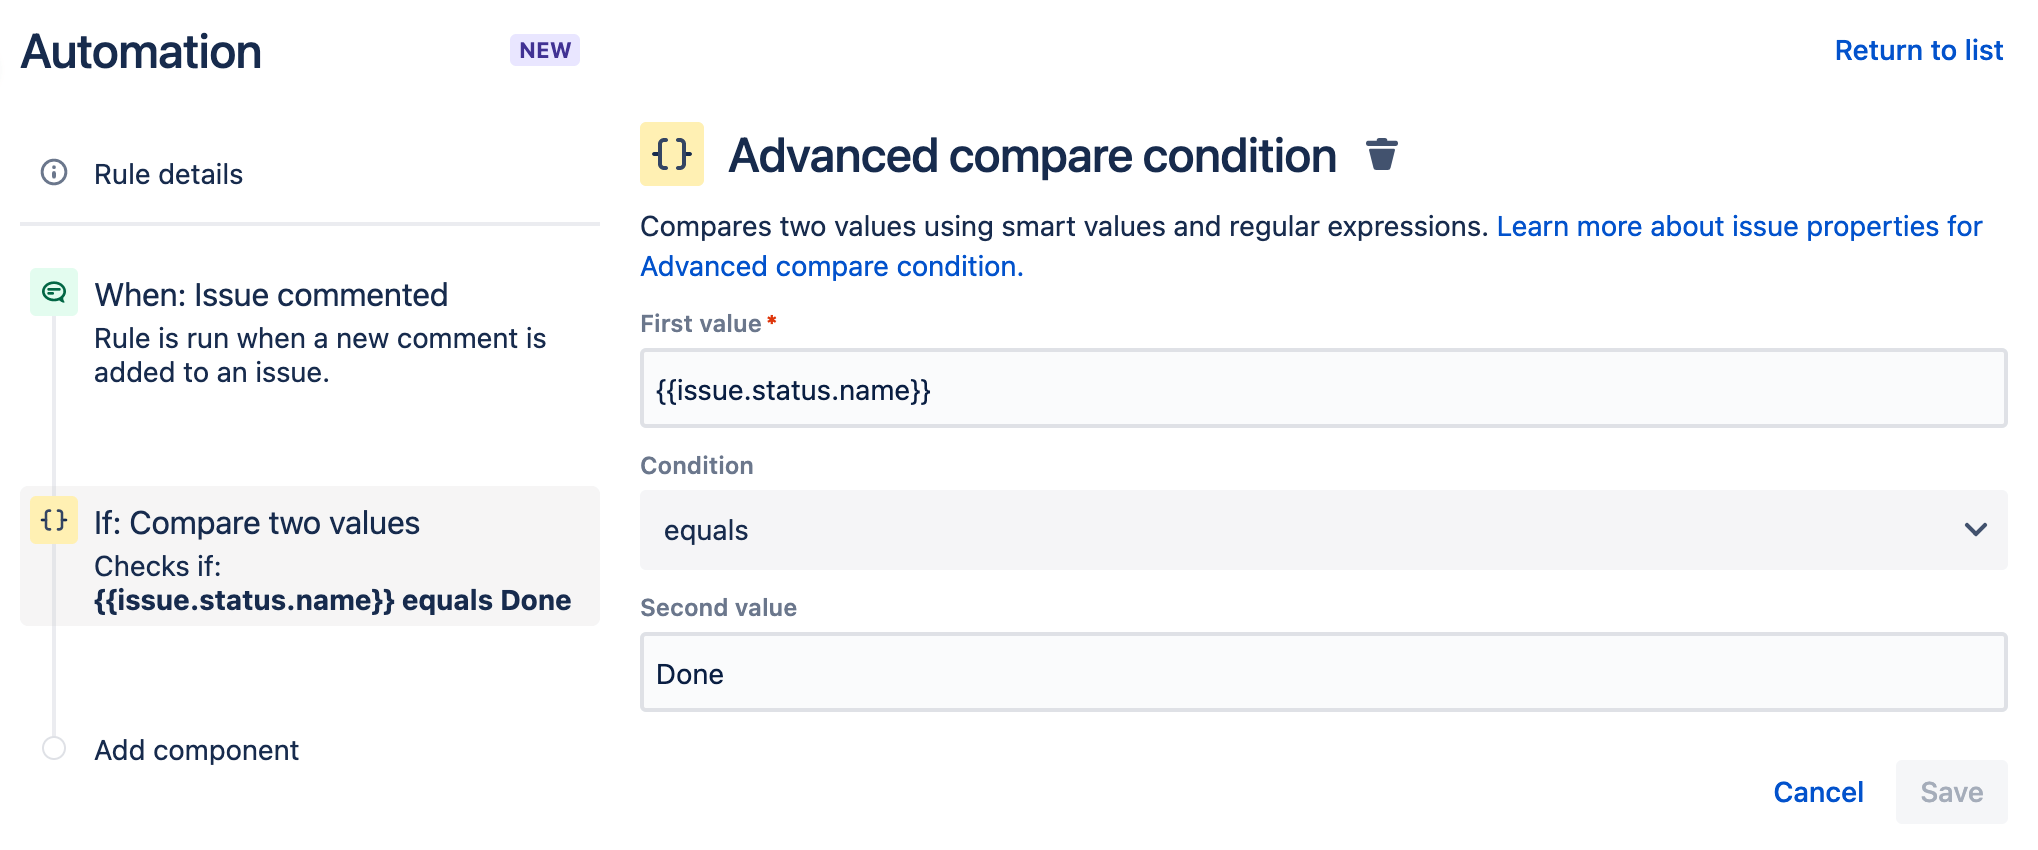 Advanced compare condition for automation in Jira Service Management